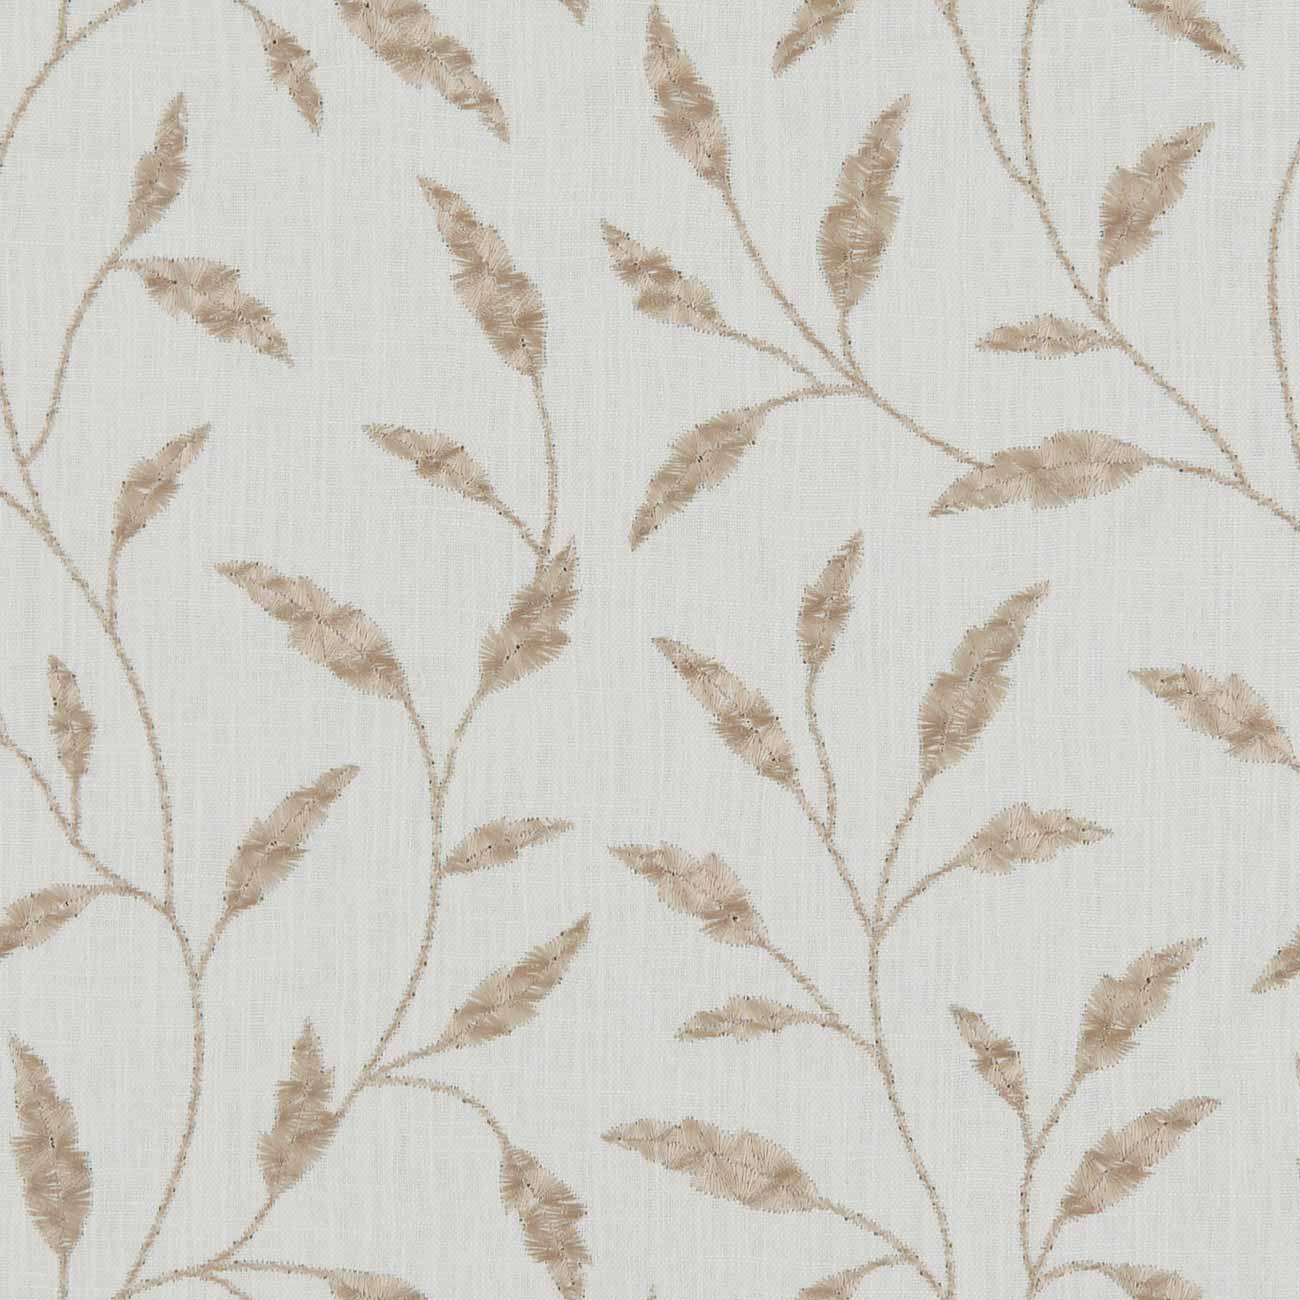 Fairford Natural Fabric by Clarke & Clarke